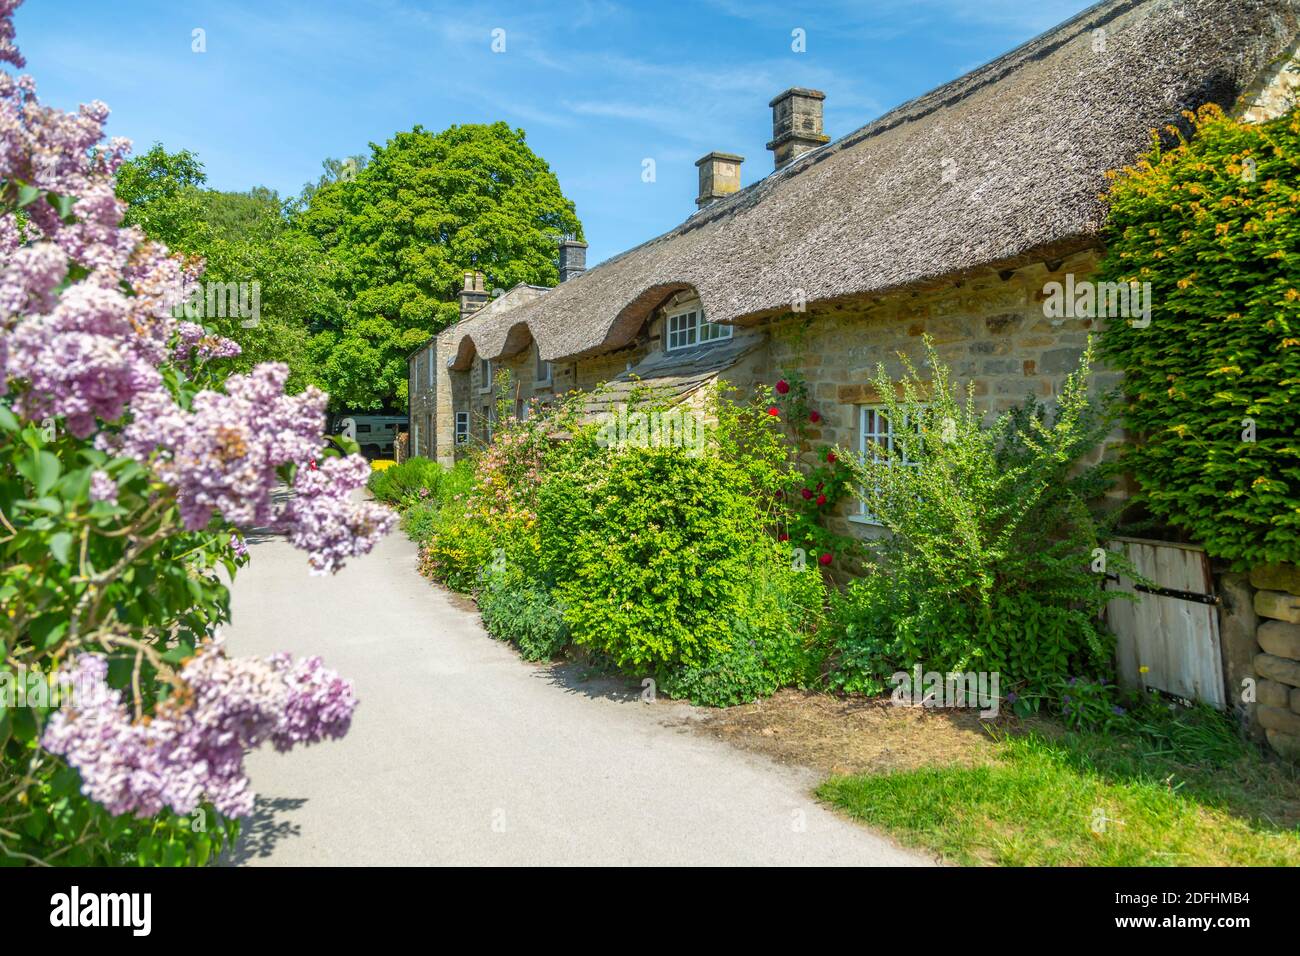 View of thatched cottages in Baslow, Derbyshire Dales, Derbyshire, England, United Kingdom, Europe Stock Photo